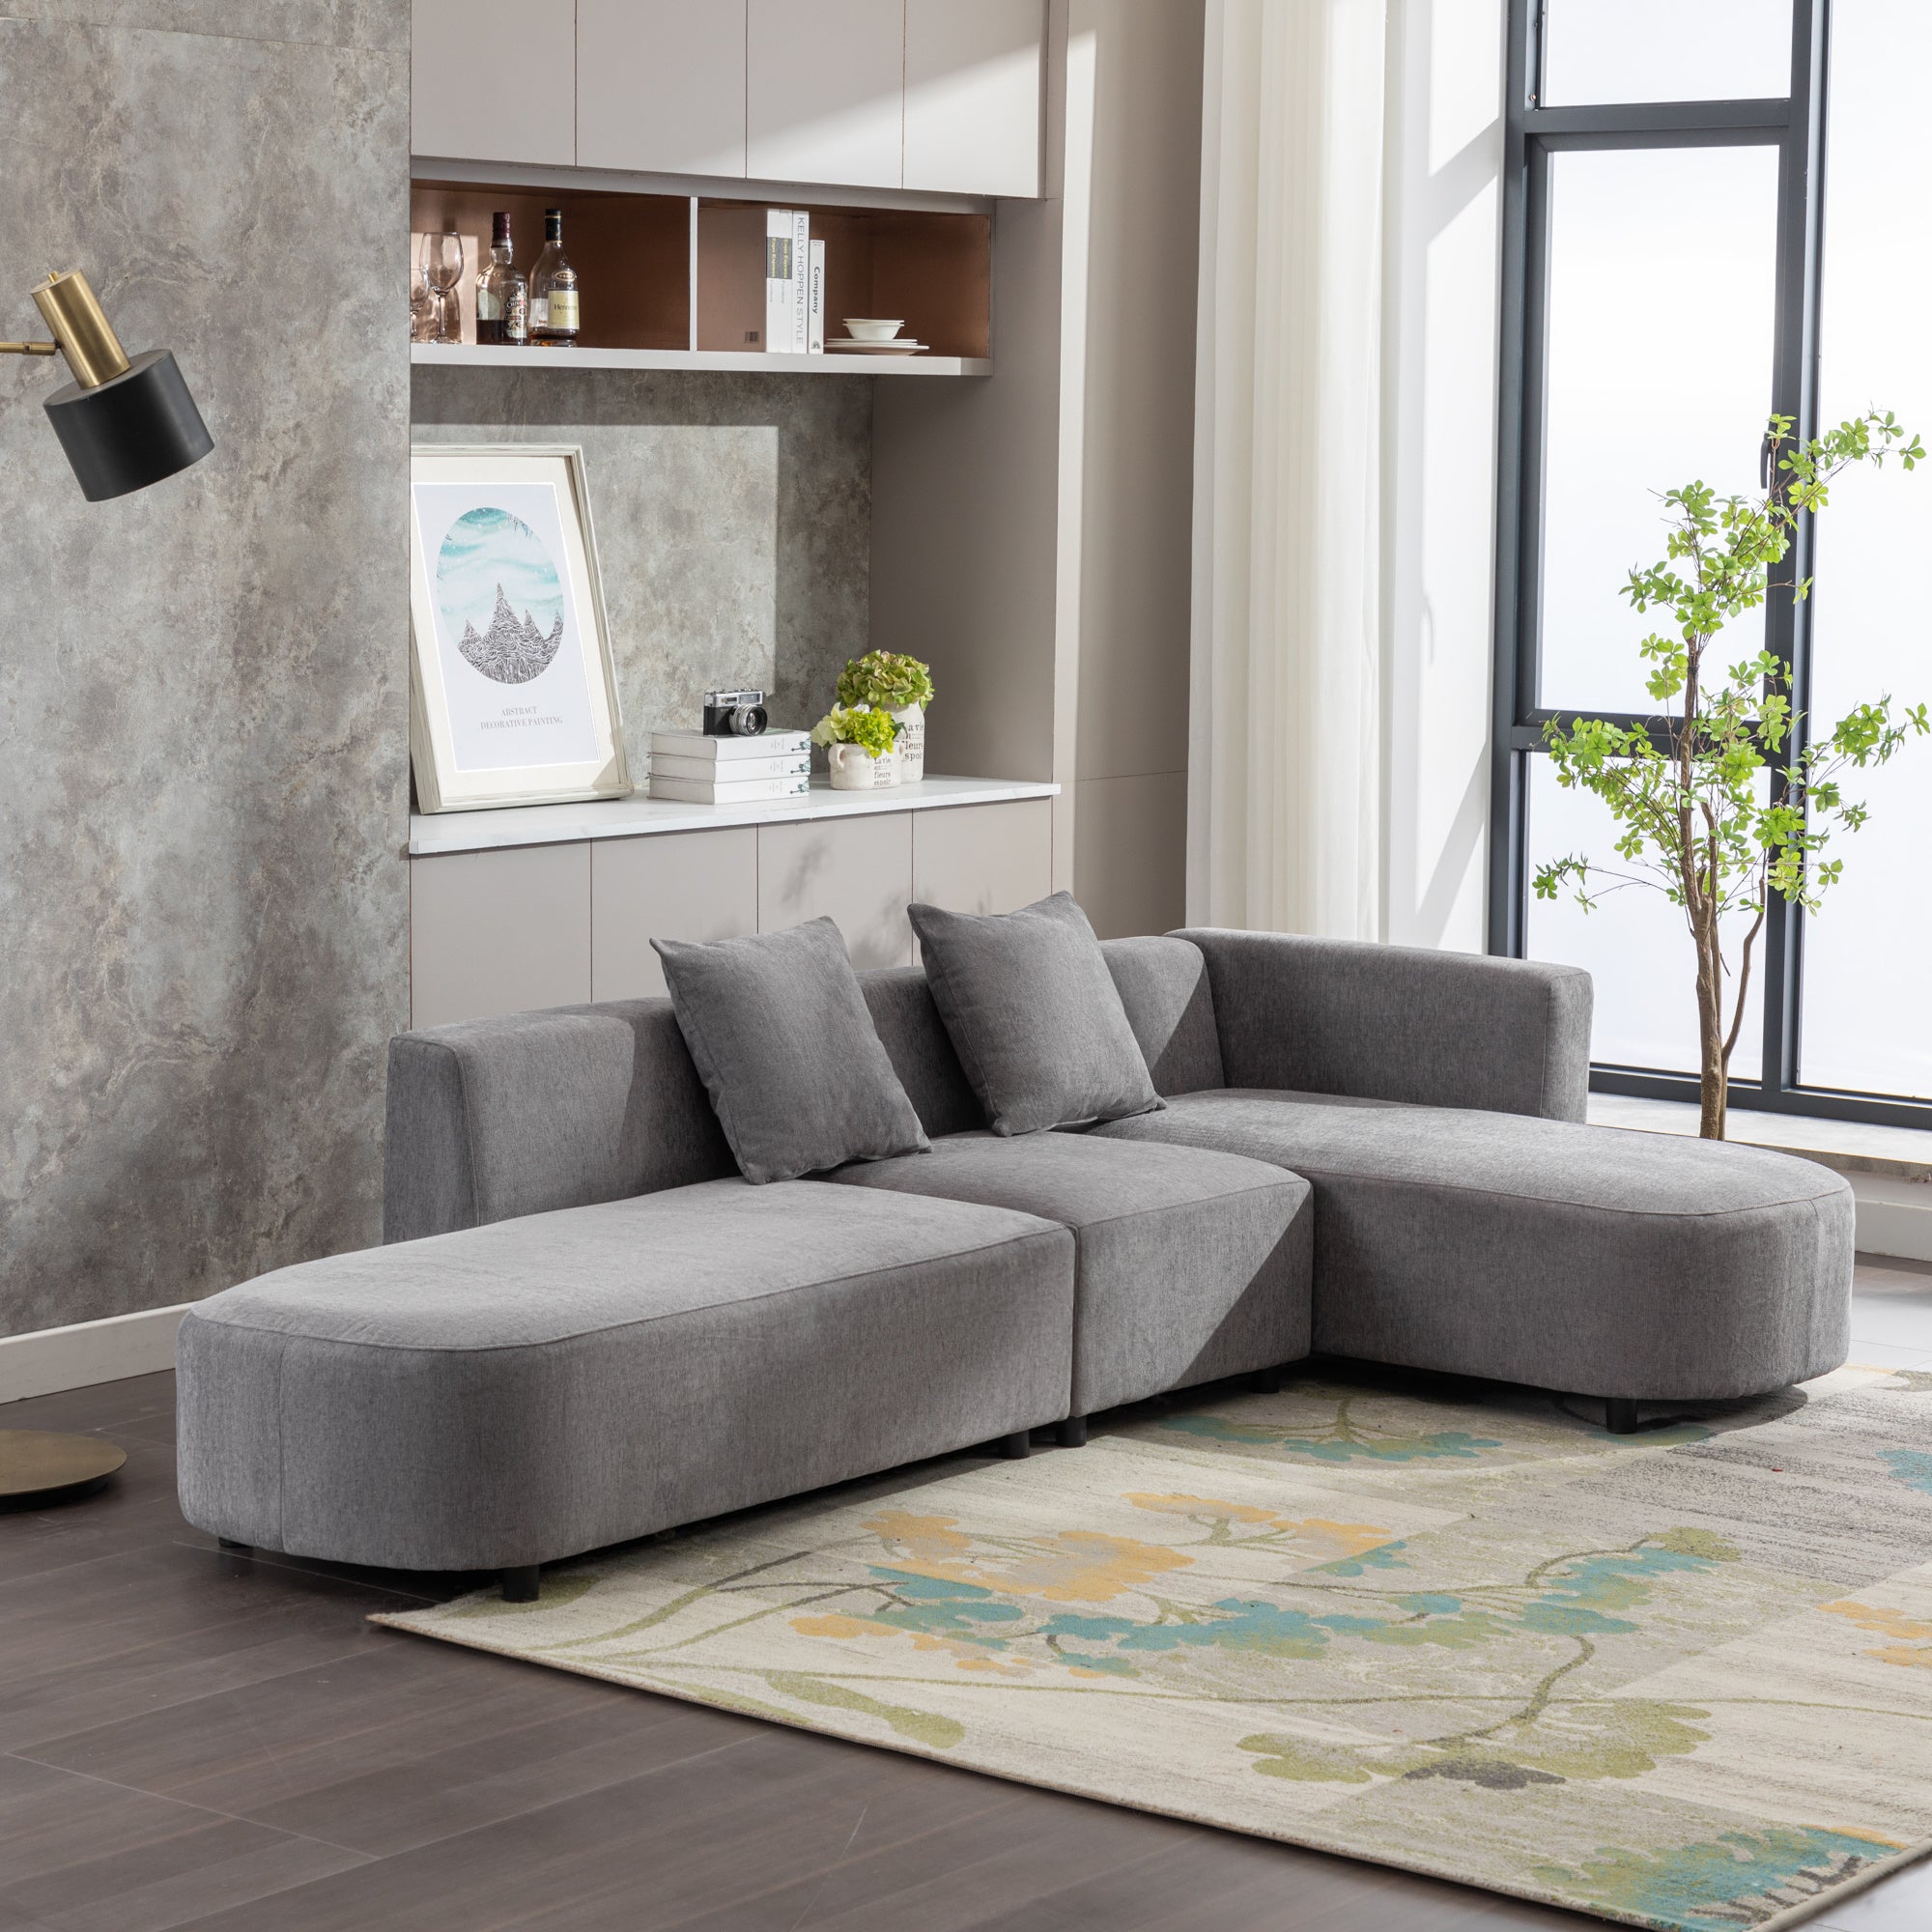 L-Shaped Sectional Luxury Modern Upholstery Sofa